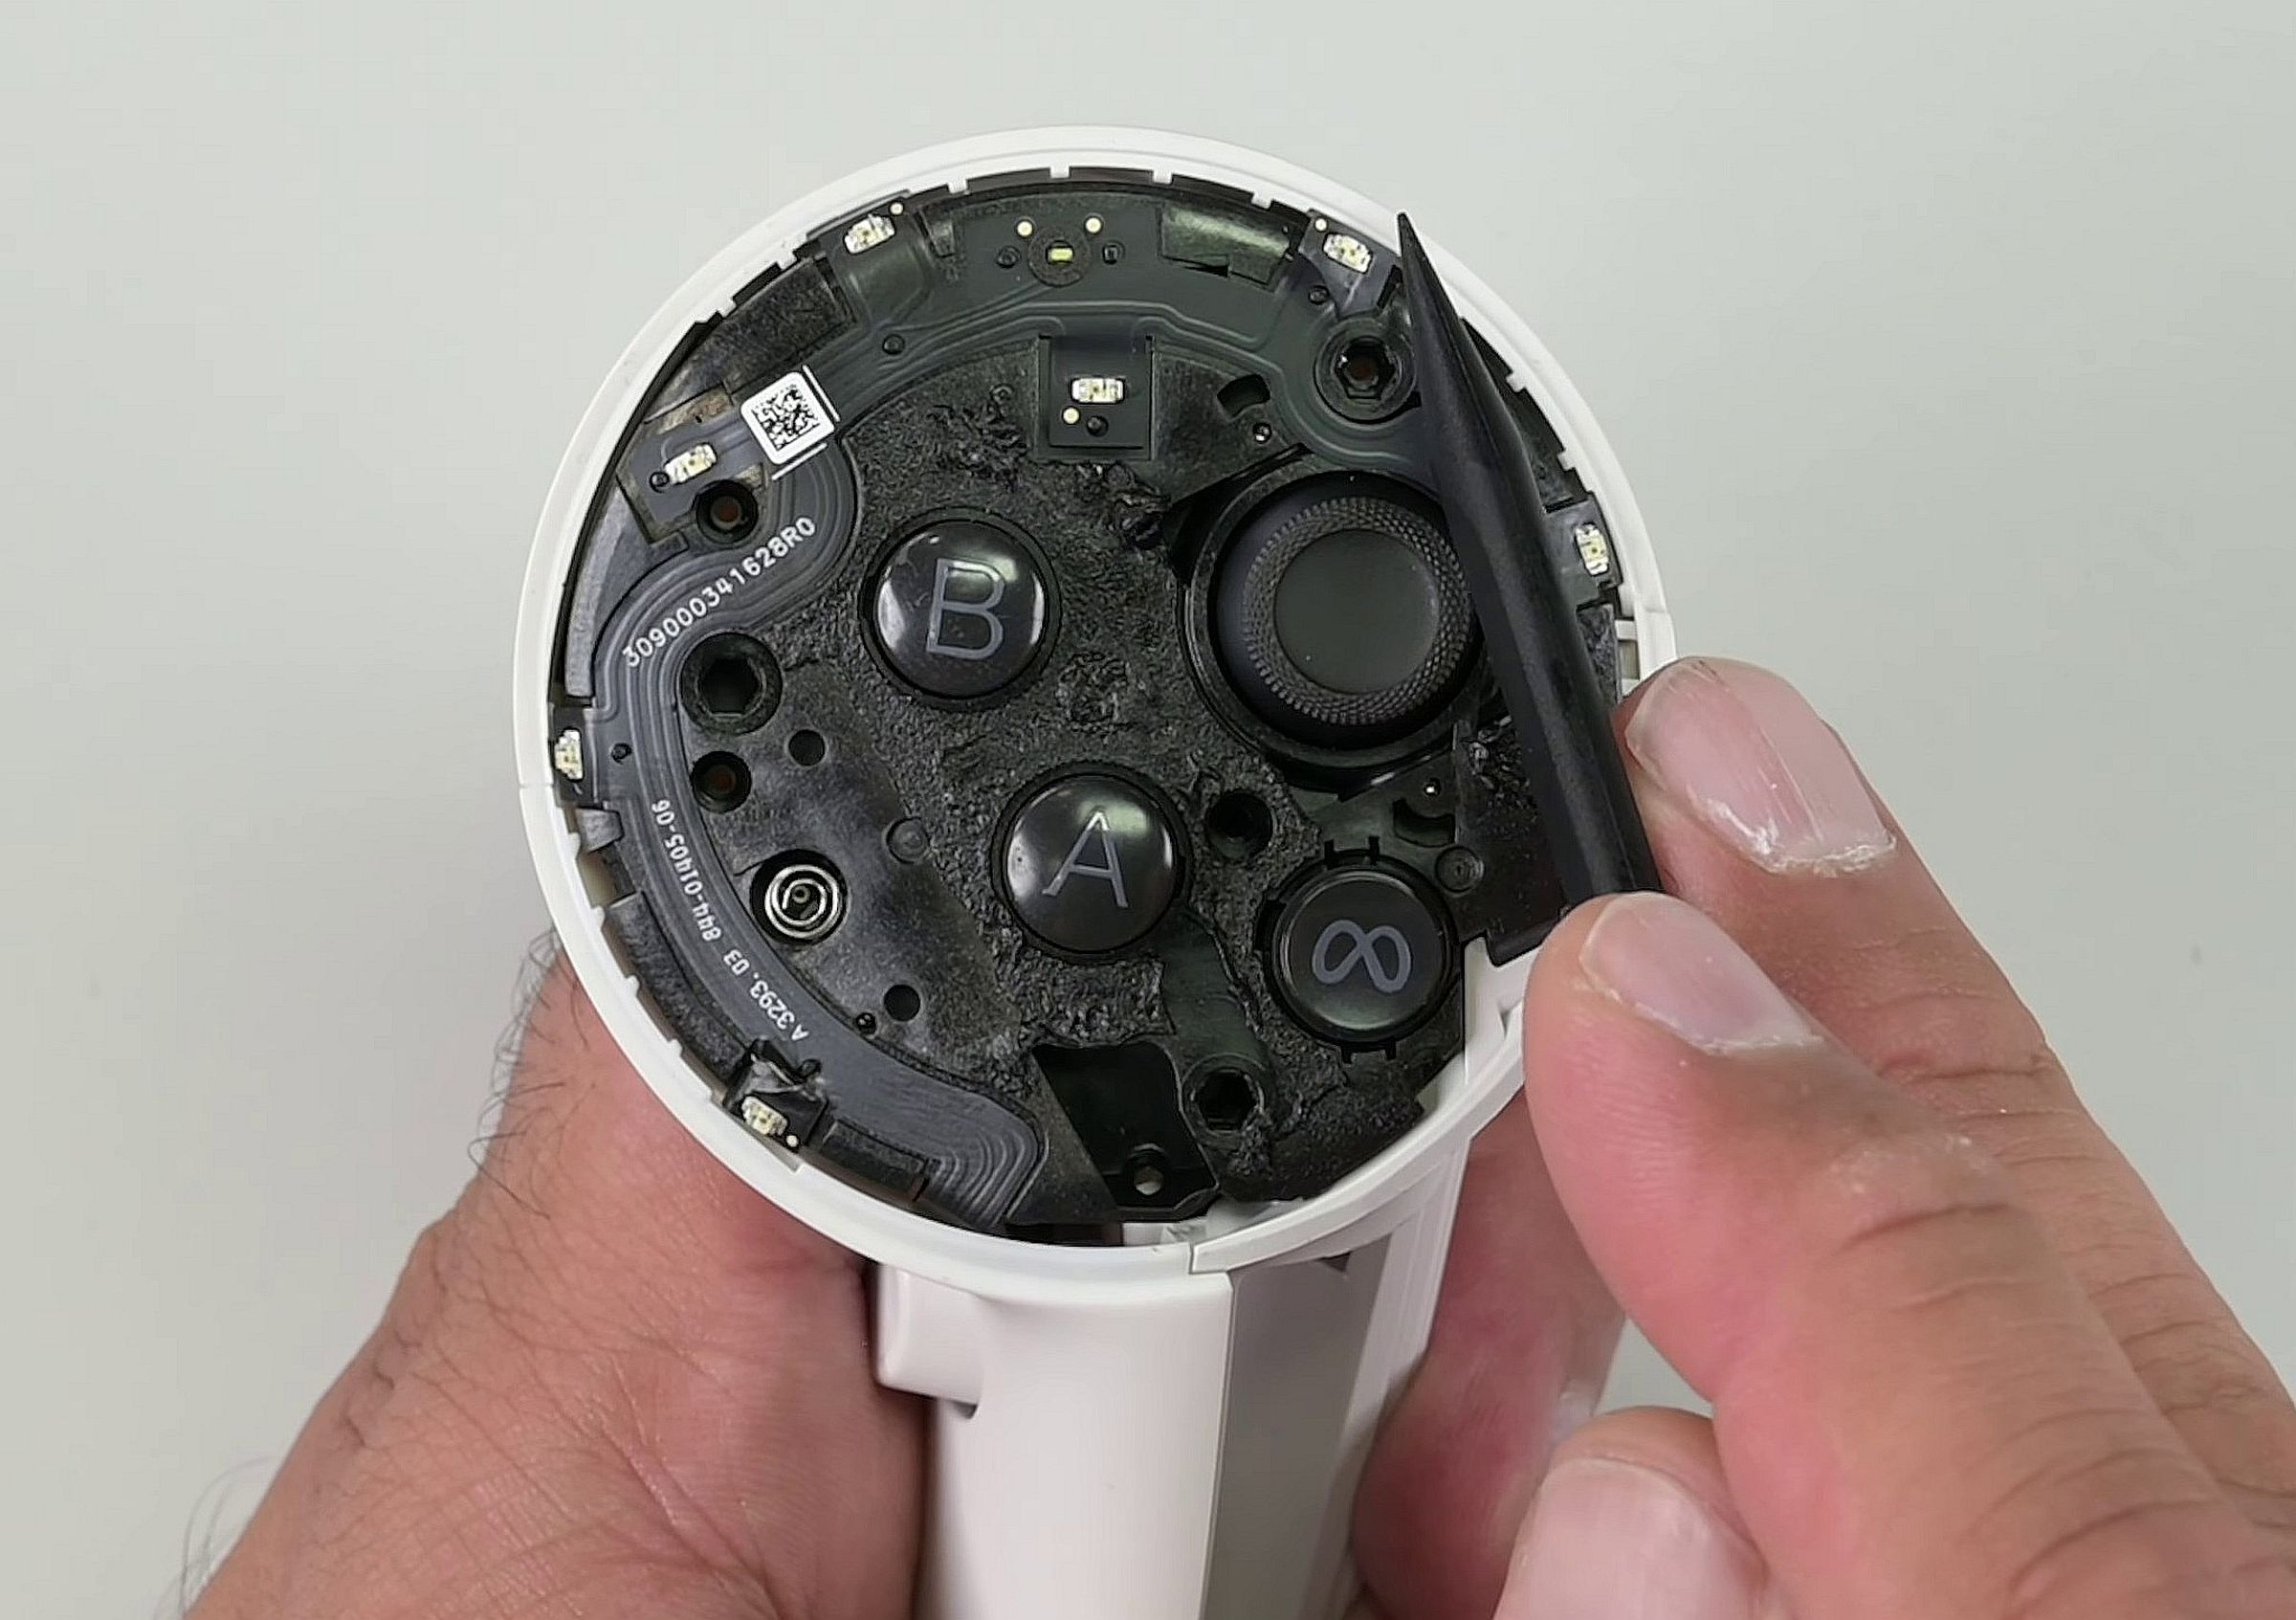 The top of the controller open, revealing a black expanse atop, which is melted glue, a ribbon cable, and seven infrared LEDs